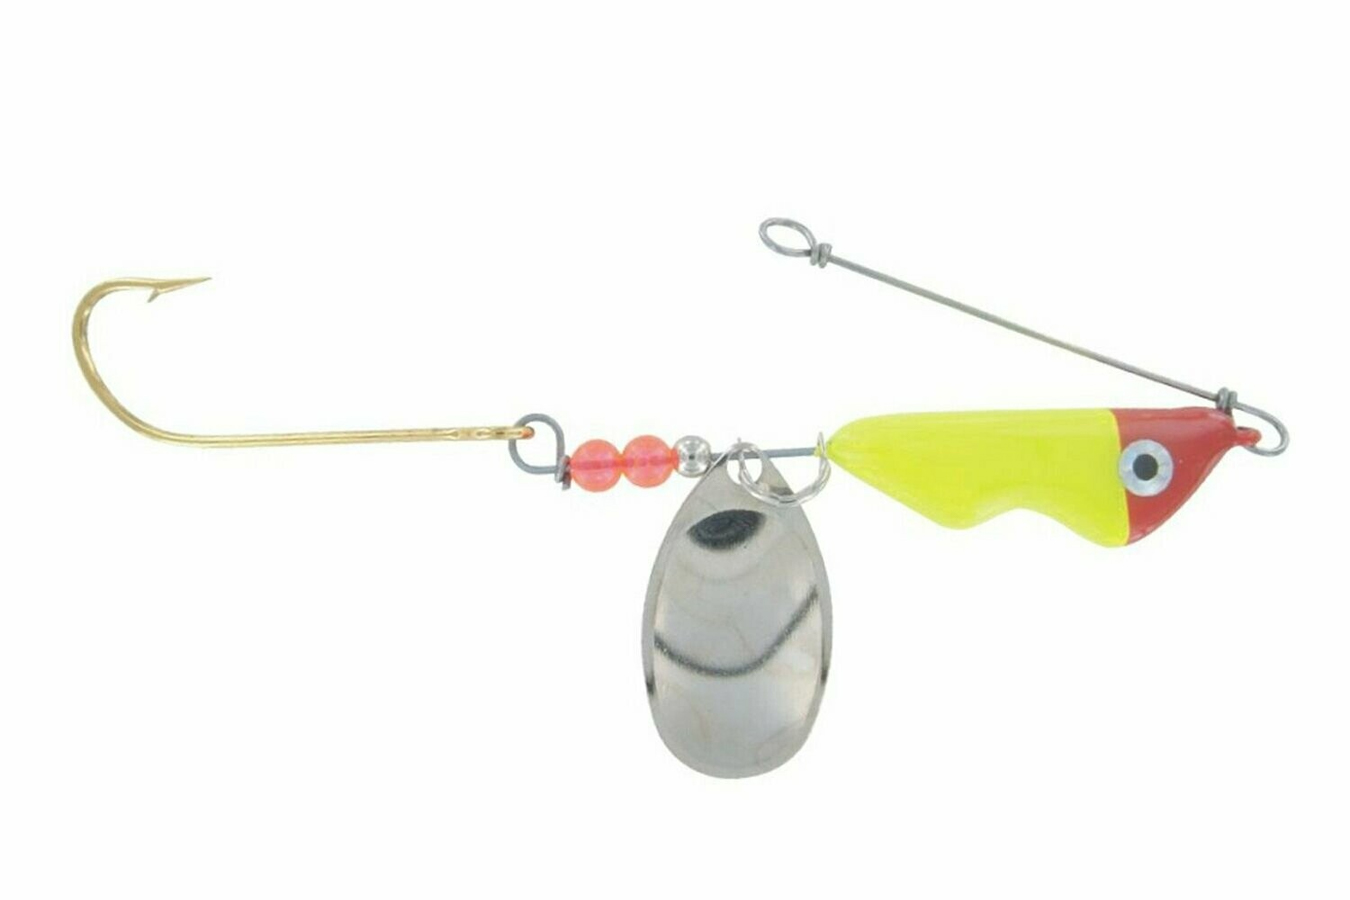 Discount Erie Dearie Original - 3/4 Oz. Spinning Bait (Fire Glow) for Sale, Online Fishing Store